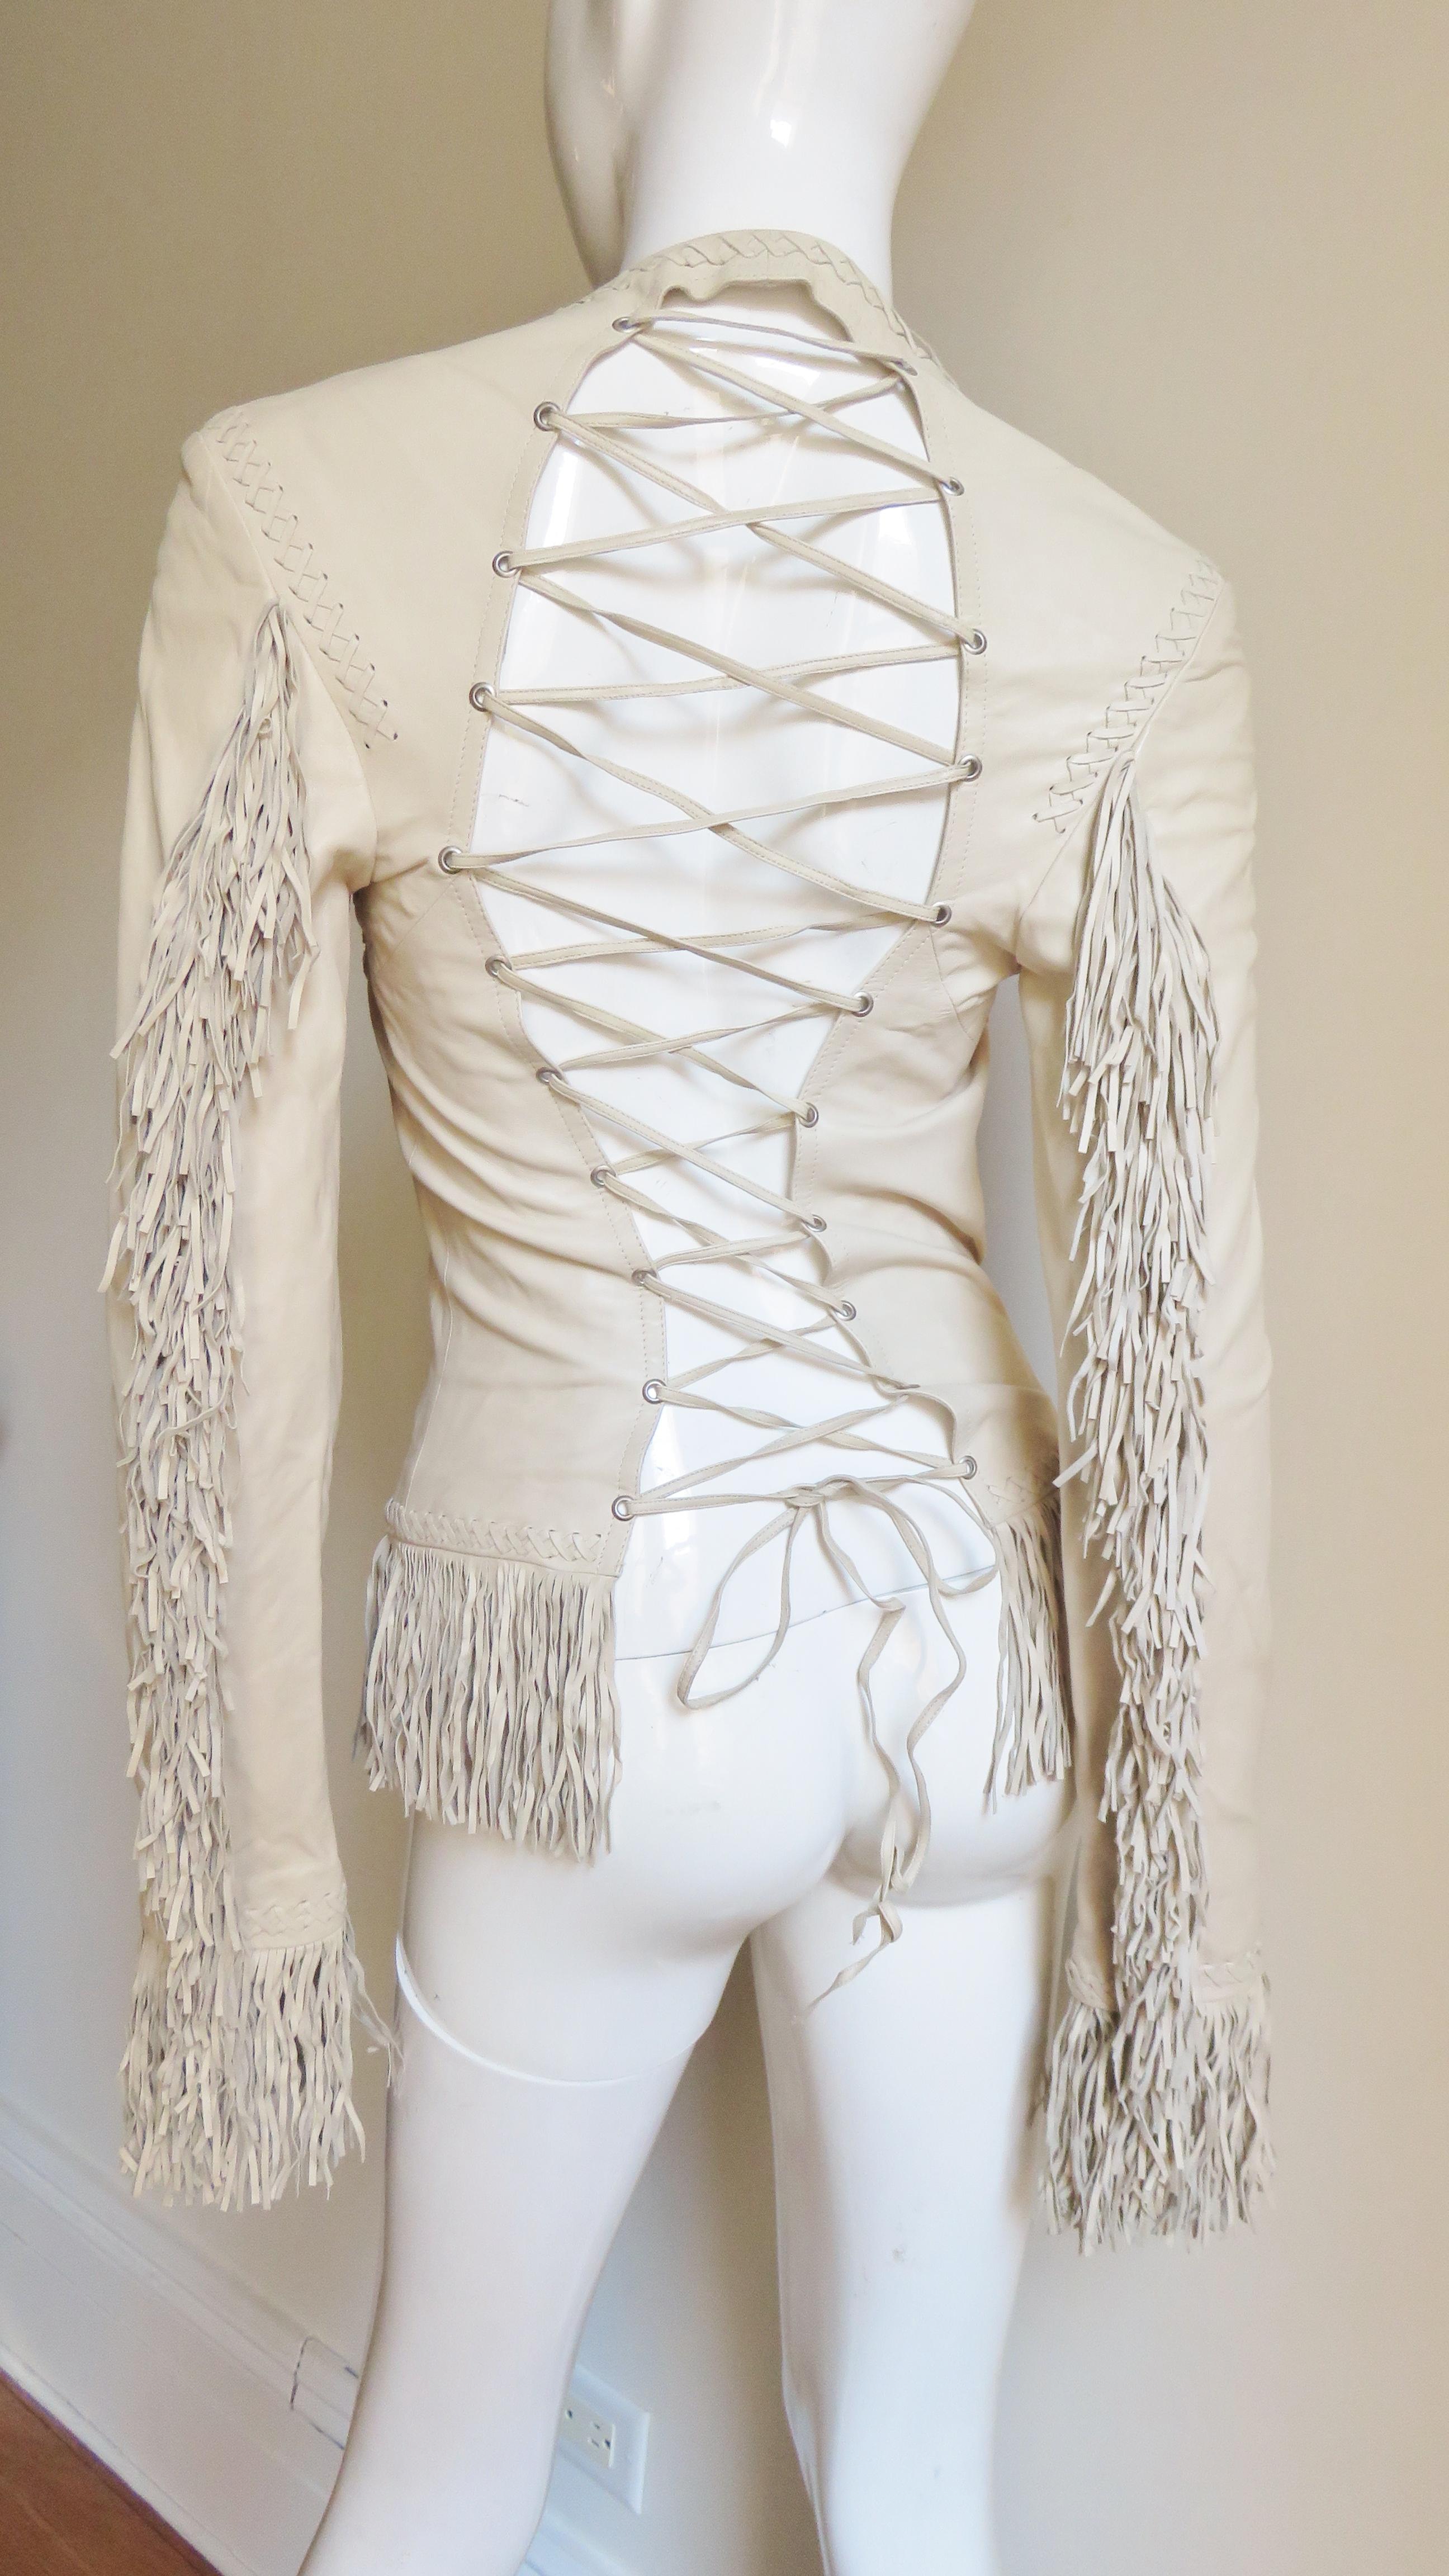 A fabulous soft, supple, off white leather jacket from Gianni Versace. It is fitted with vertical seaming which is highlighted with intricate braiding plus 4